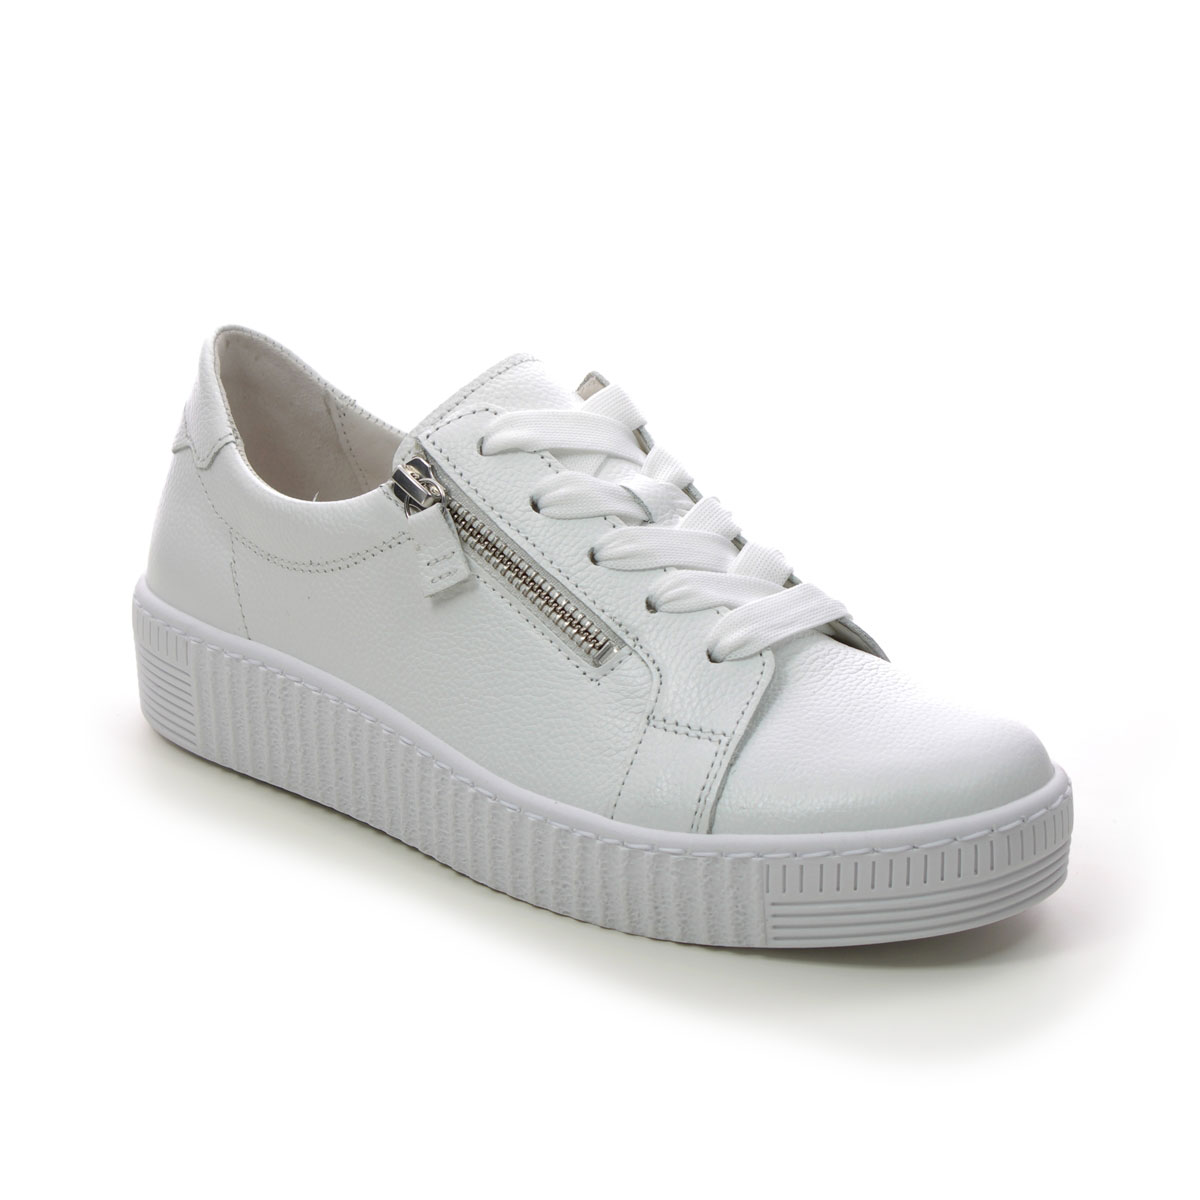 Gabor Wisdom White Leather Womens Trainers 23.334.21 In Size 7.5 In Plain White Leather  Womens Trainers In Soft White Leather Leather